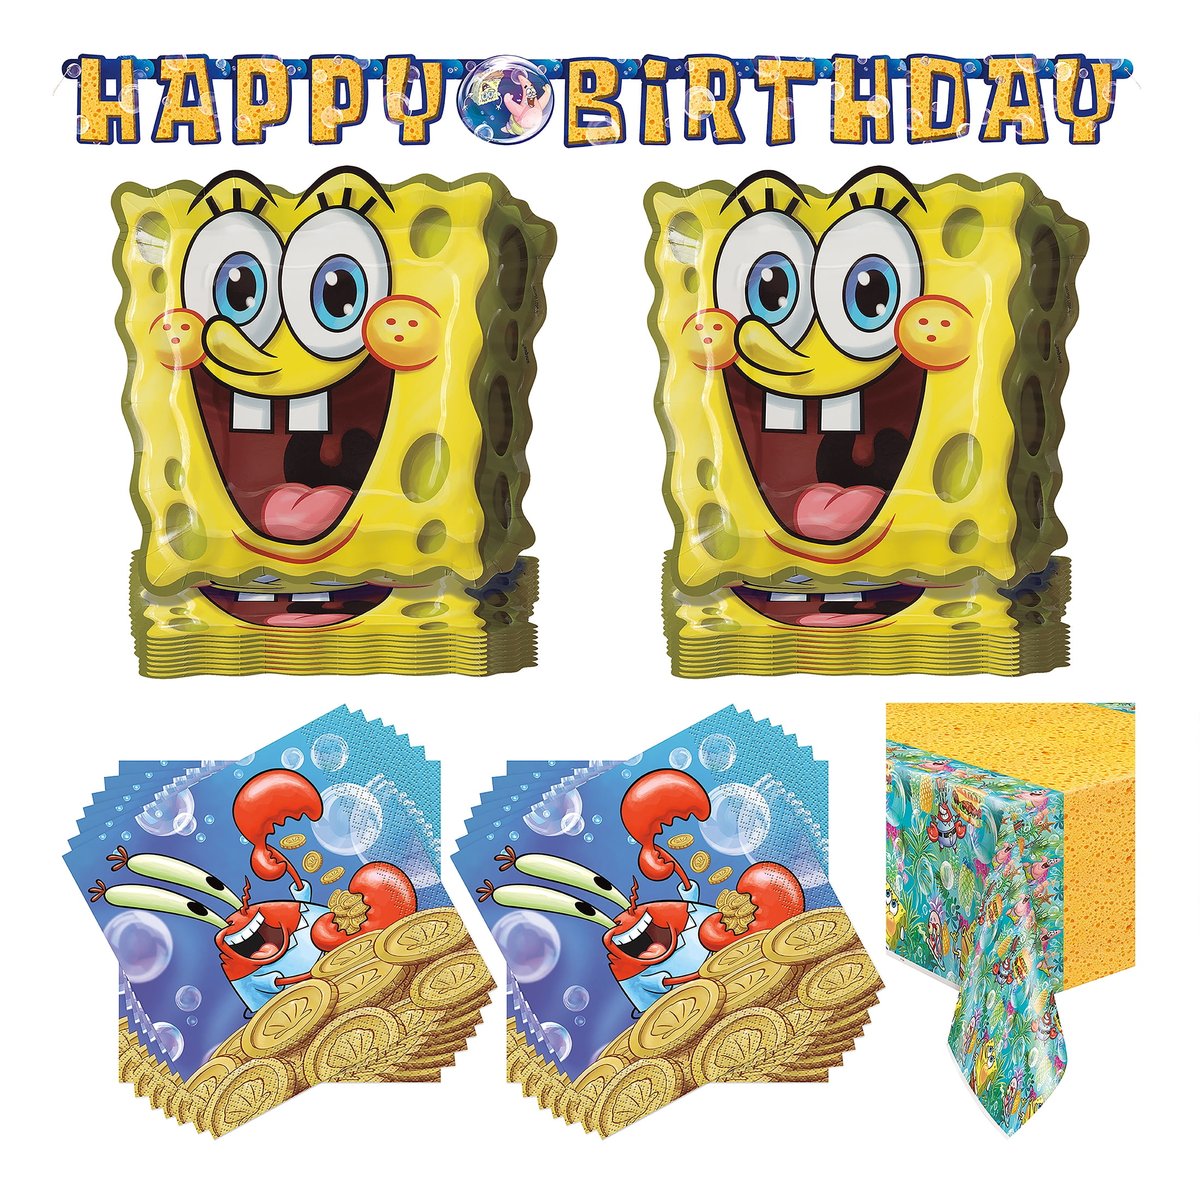 Multicolor Spongebob Squarepants Birthday Party Tableware and Banner ~ $12.98

GET IT NOW--->tinyurl.com/mrtt3m4n

#couponcommunity #discounts #discountshopping #DiscountDeals #discountoffer #Deals #StealsAndDeals #AmazonDeals #Bargains #SaveMoney #ClearanceSale